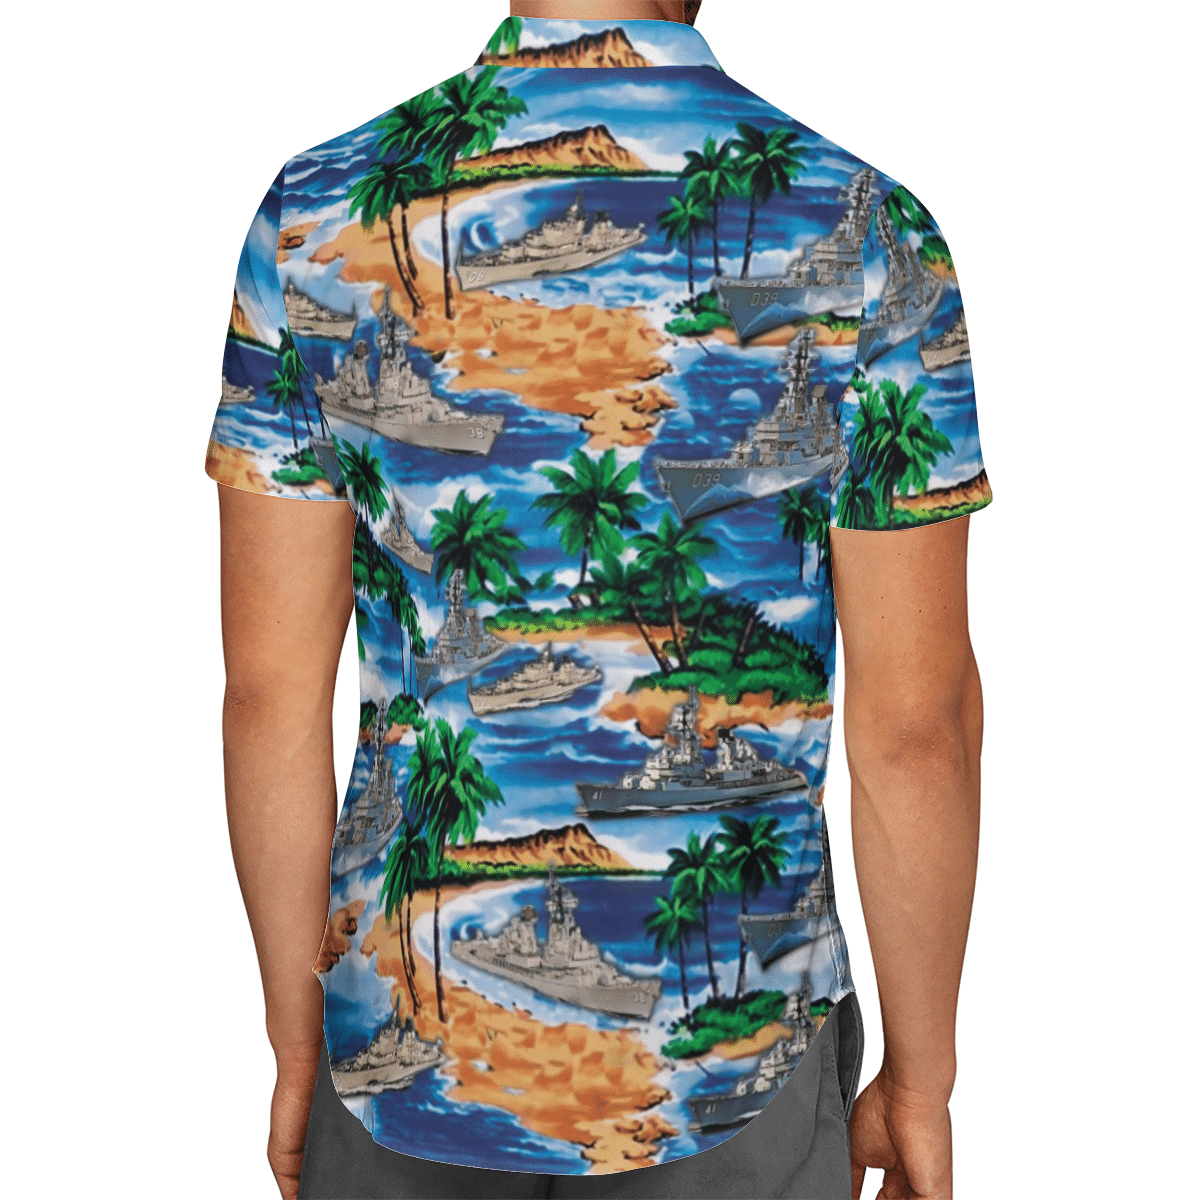 Find yourself or a group of friends a cool beach outfit idea 260